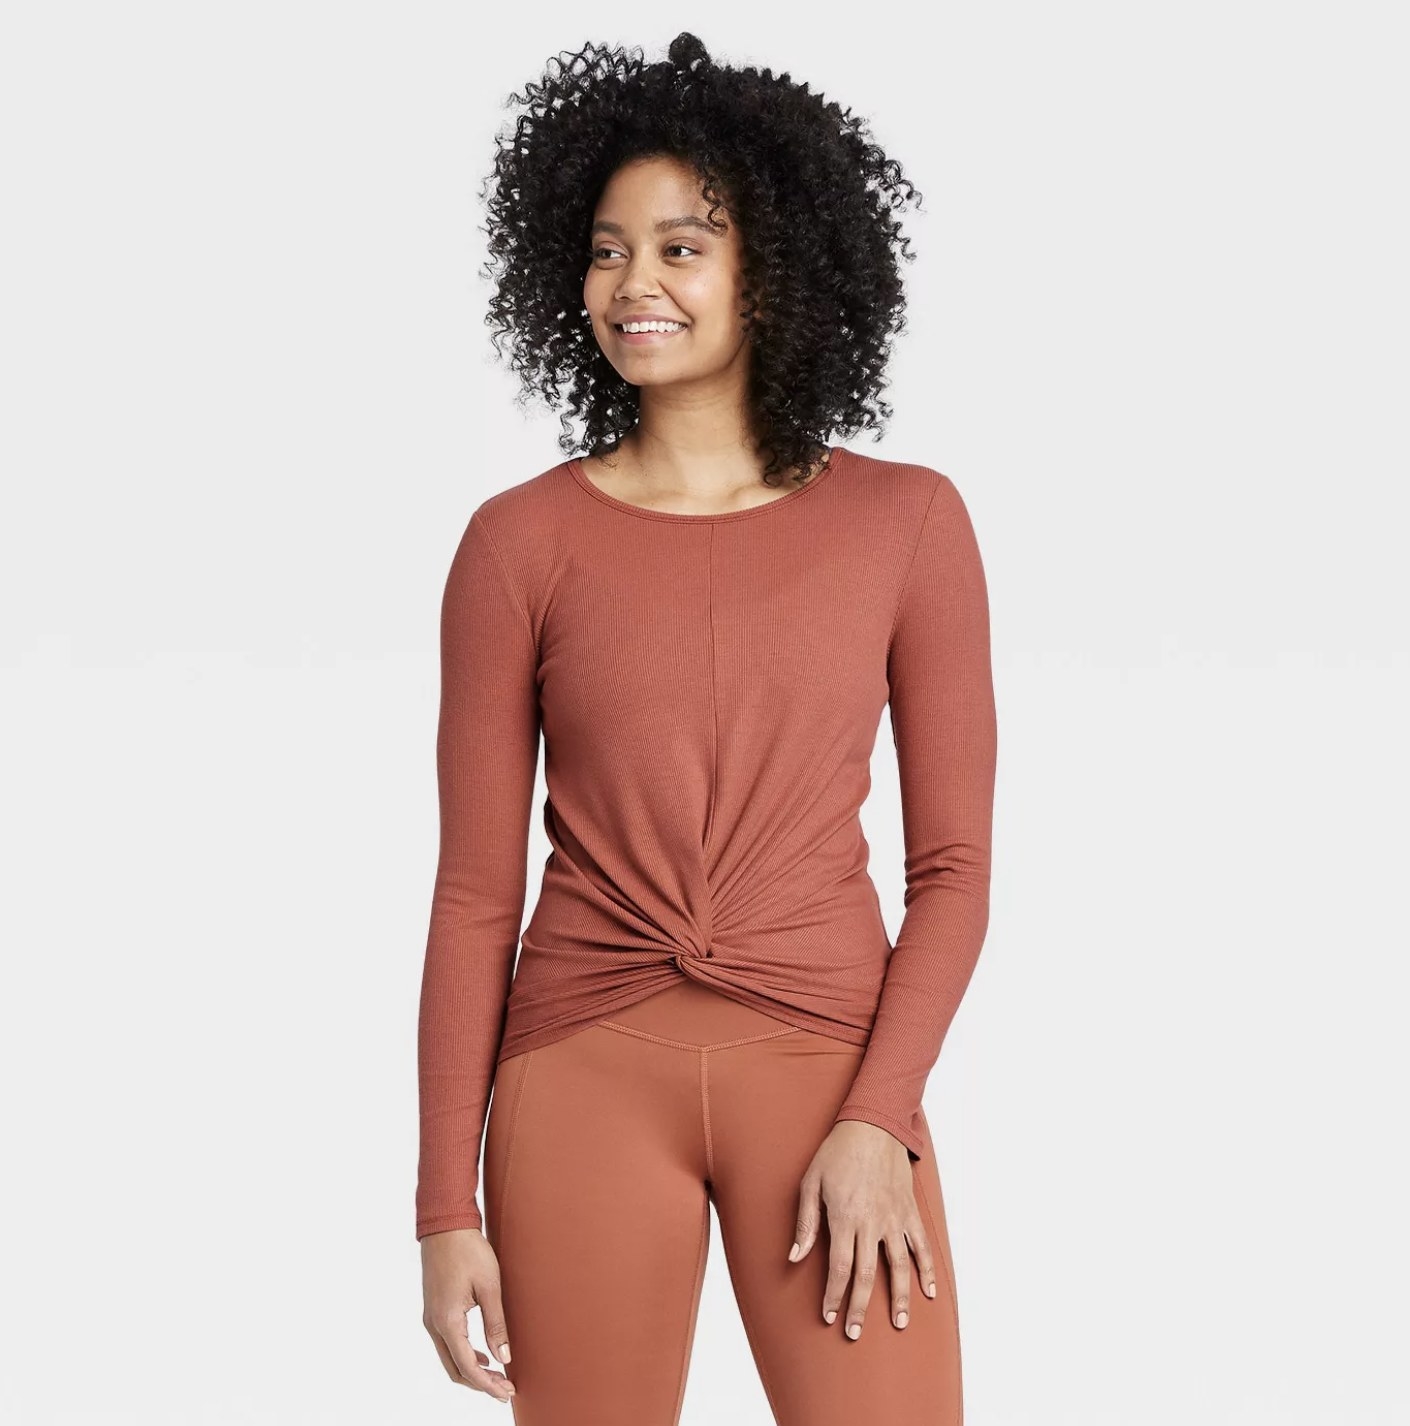 The burnt orange top with front knot 